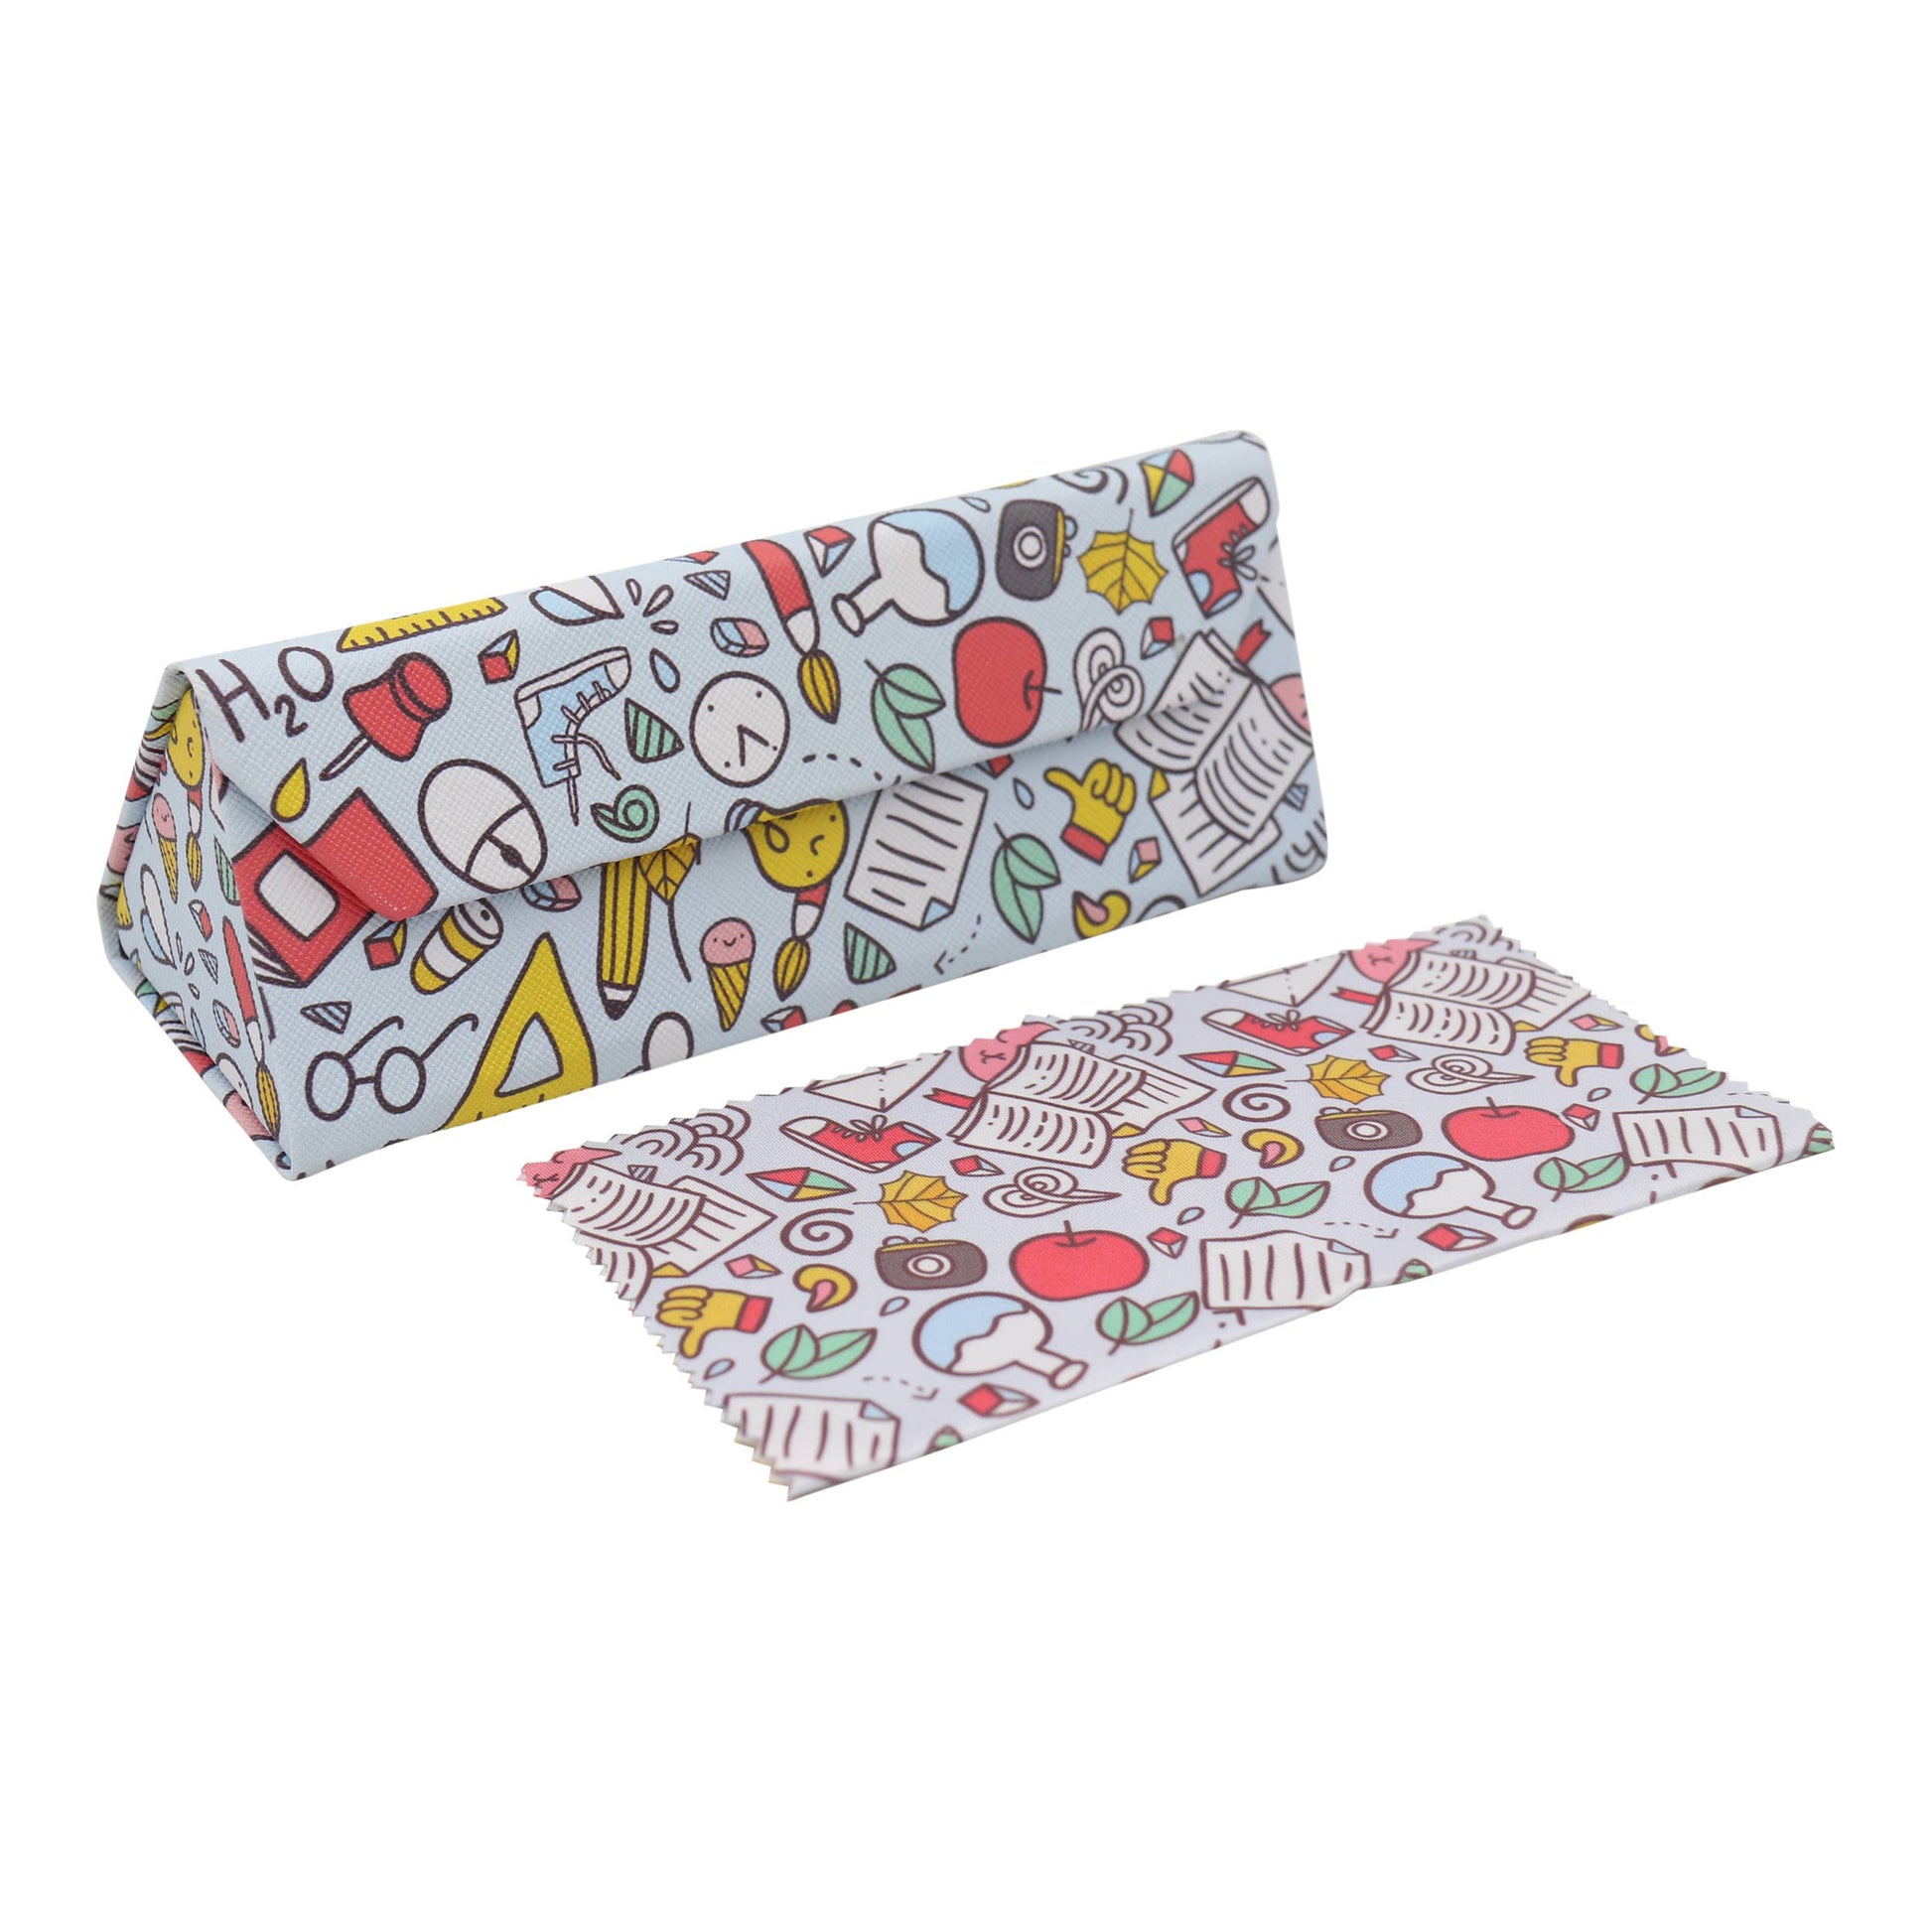 Image of Real Sic Back to School Glasses Case With Cleaning Cloth for Eyeglasses, Sunglasses